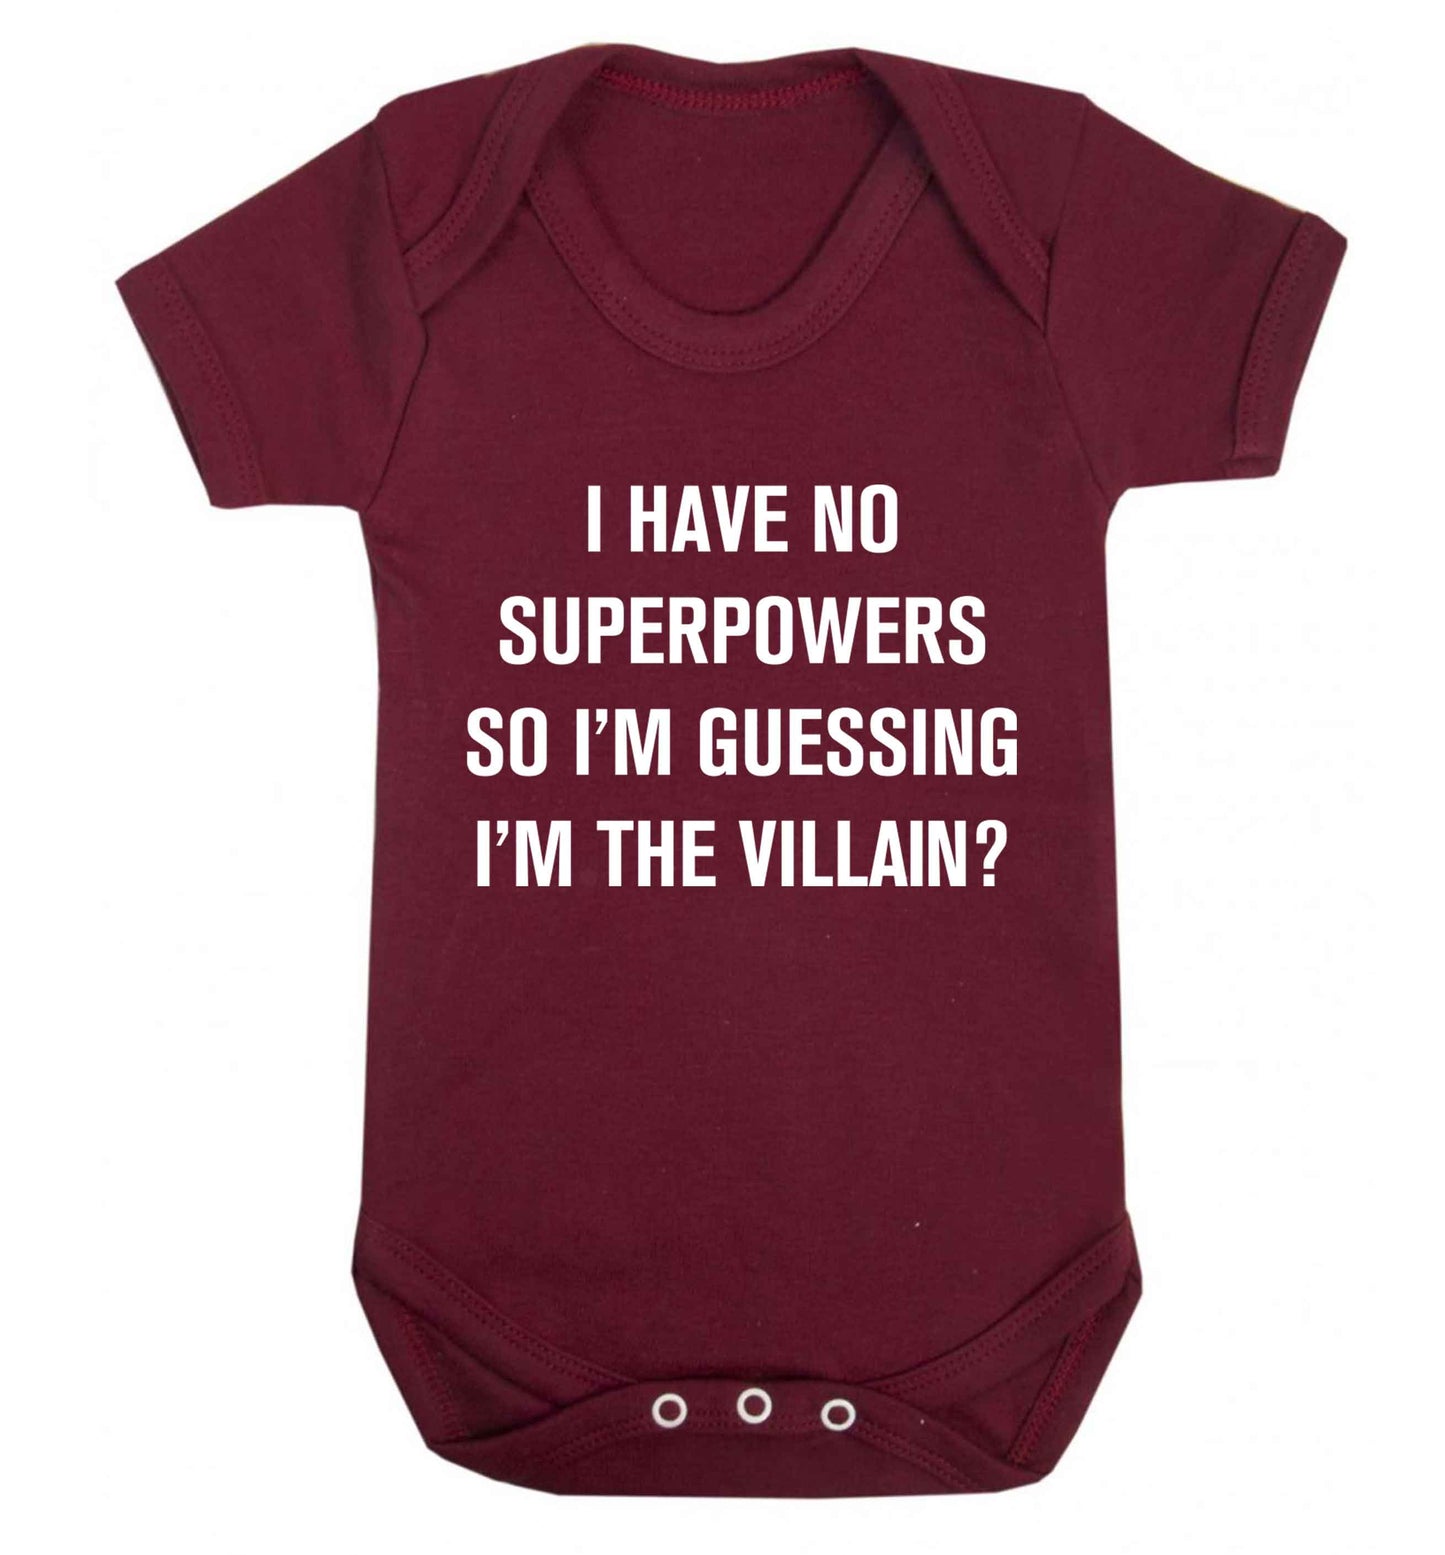 I have no superpowers so I'm guessing I'm the villain? Baby Vest maroon 18-24 months